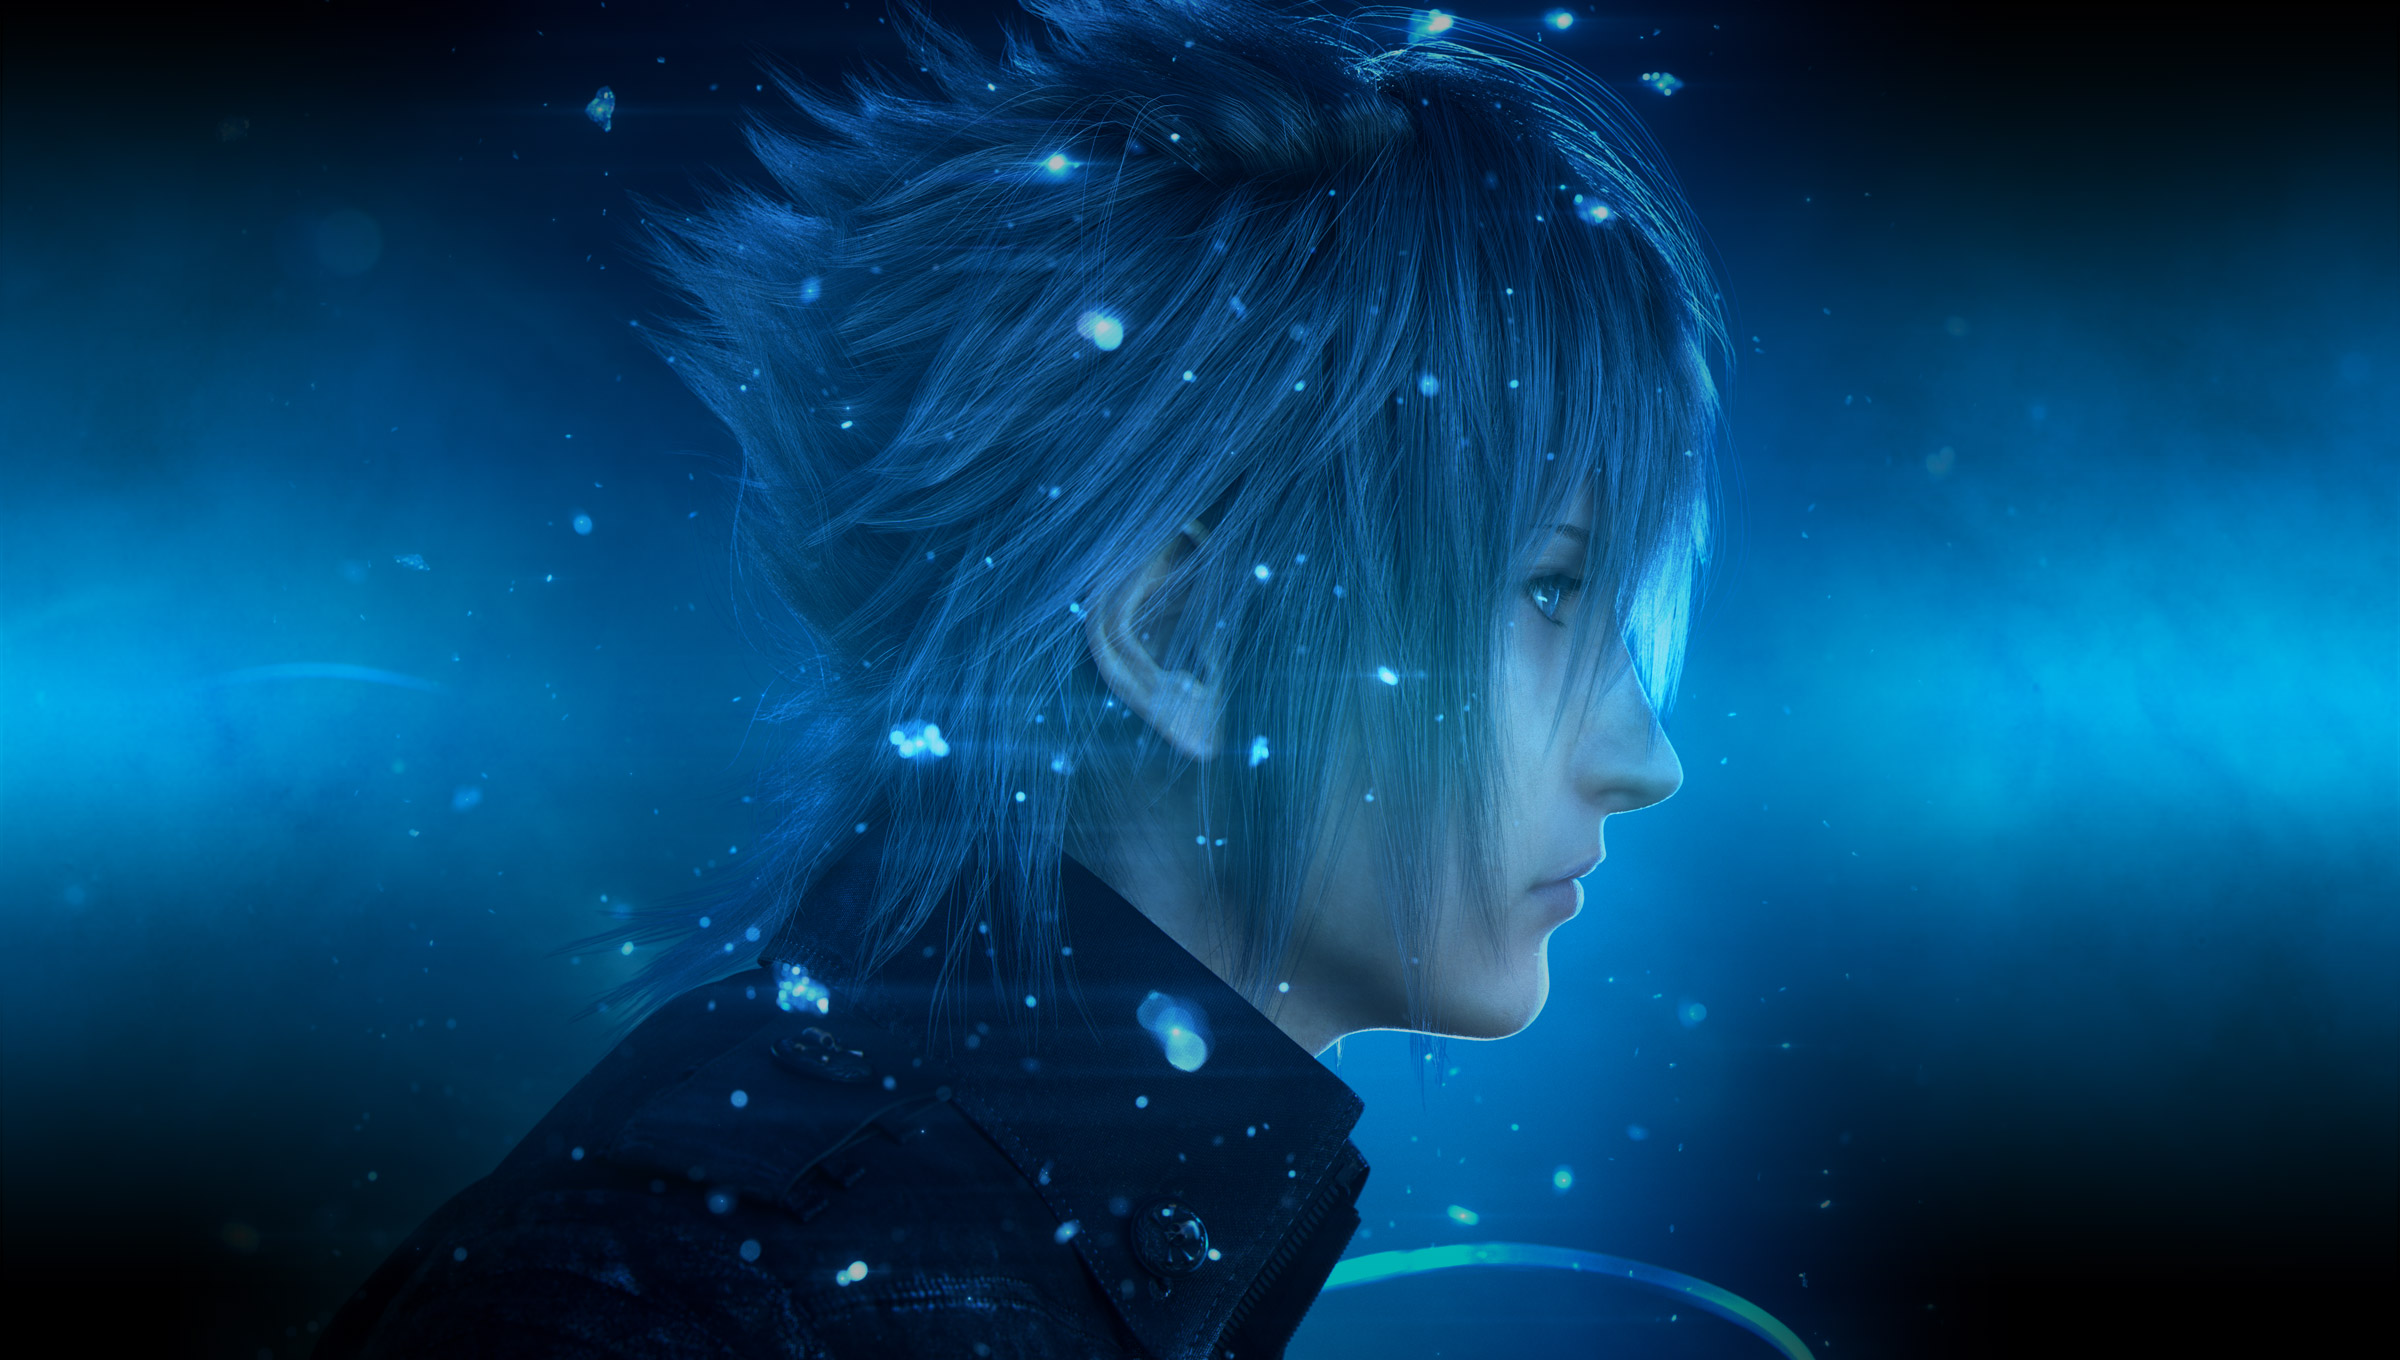 Final Fantasy XV Wallpapers, Pictures, Images